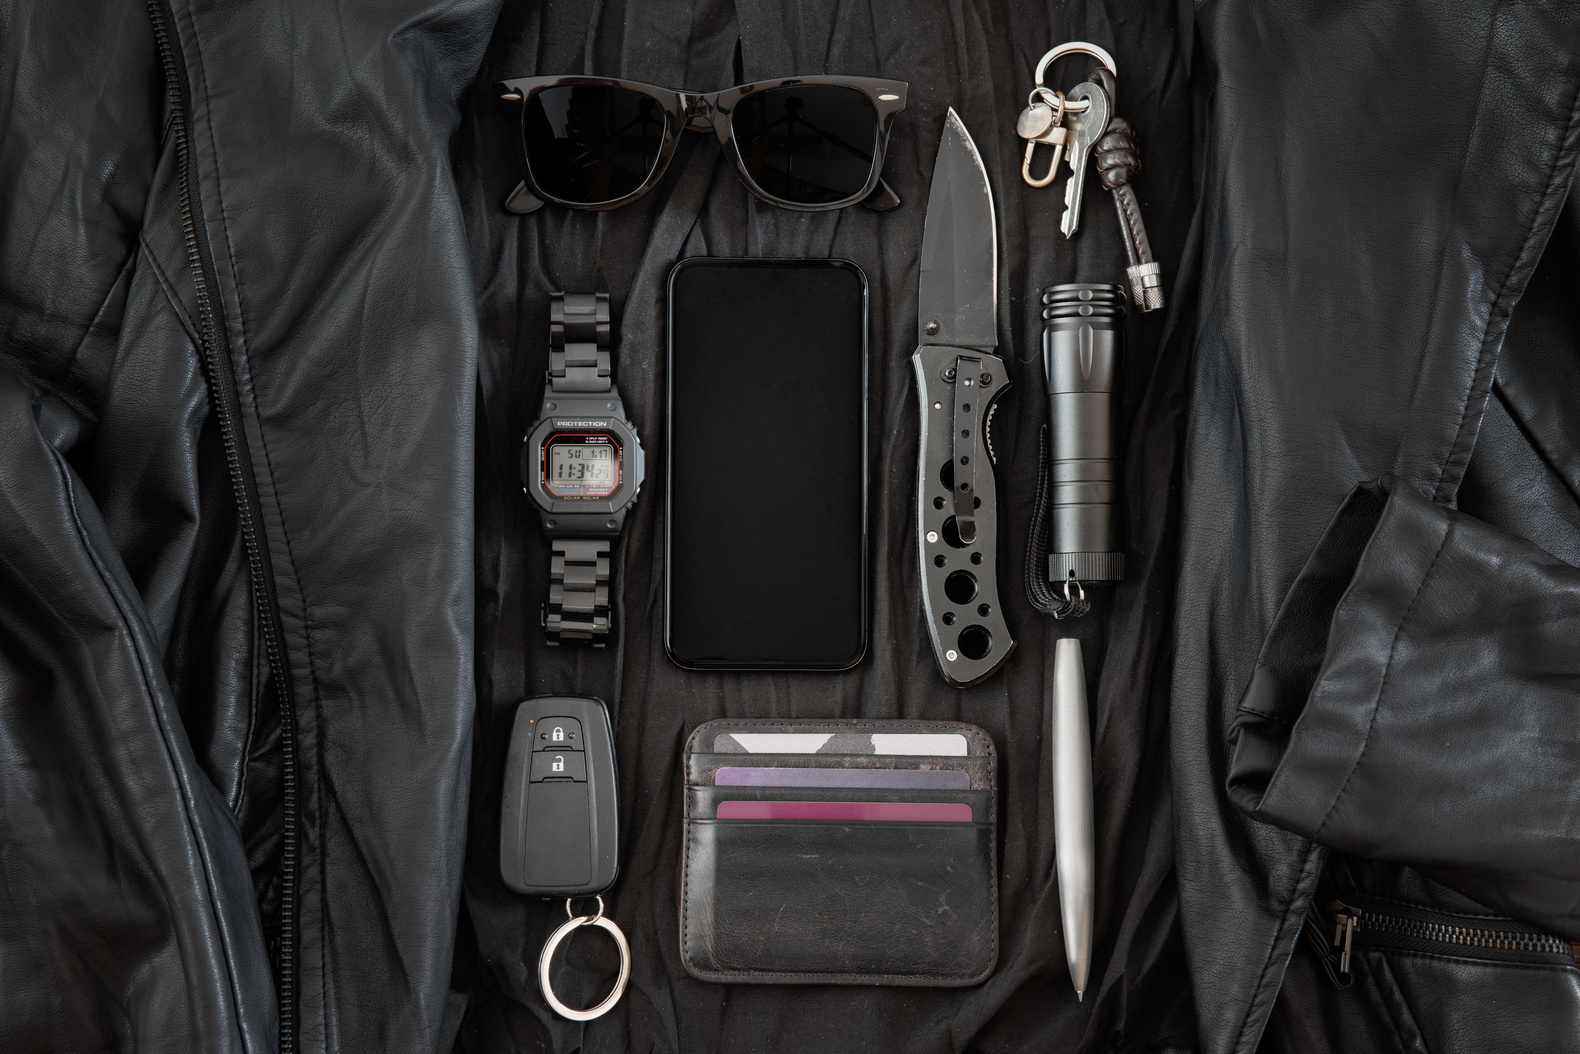 Everyday Carry Items Laid Out on Black Leather Jacket